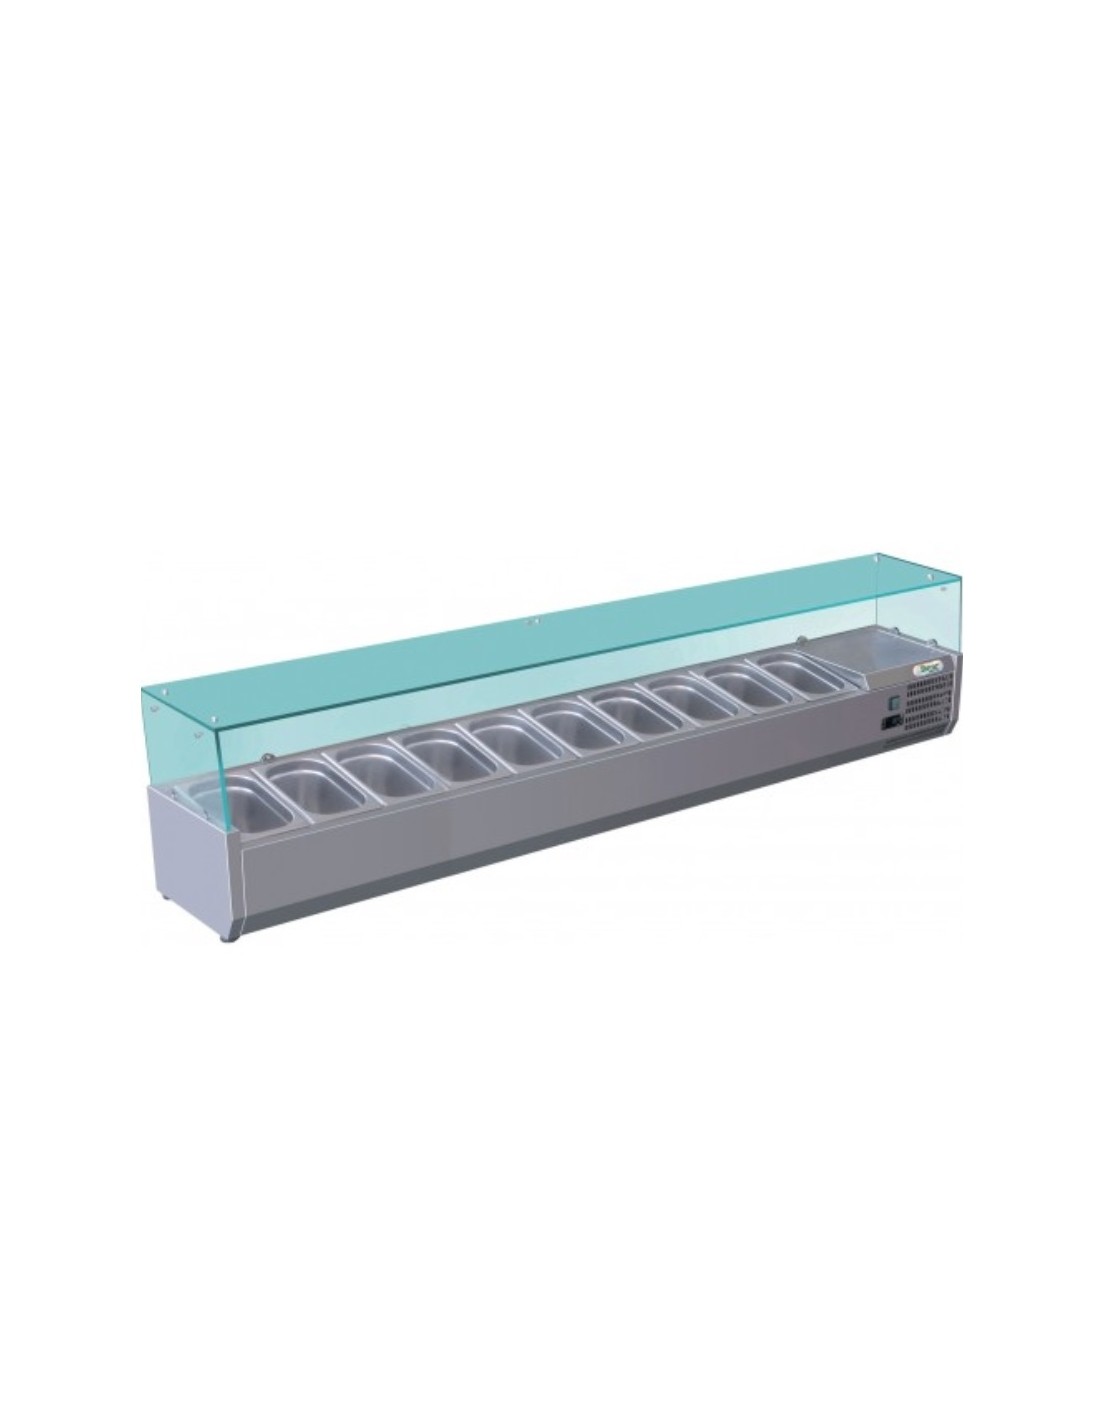 Refrigerated display case brings ingredients - Static - Capacity 10 GN 1/4 - cm 200 x 33 x 44.5h